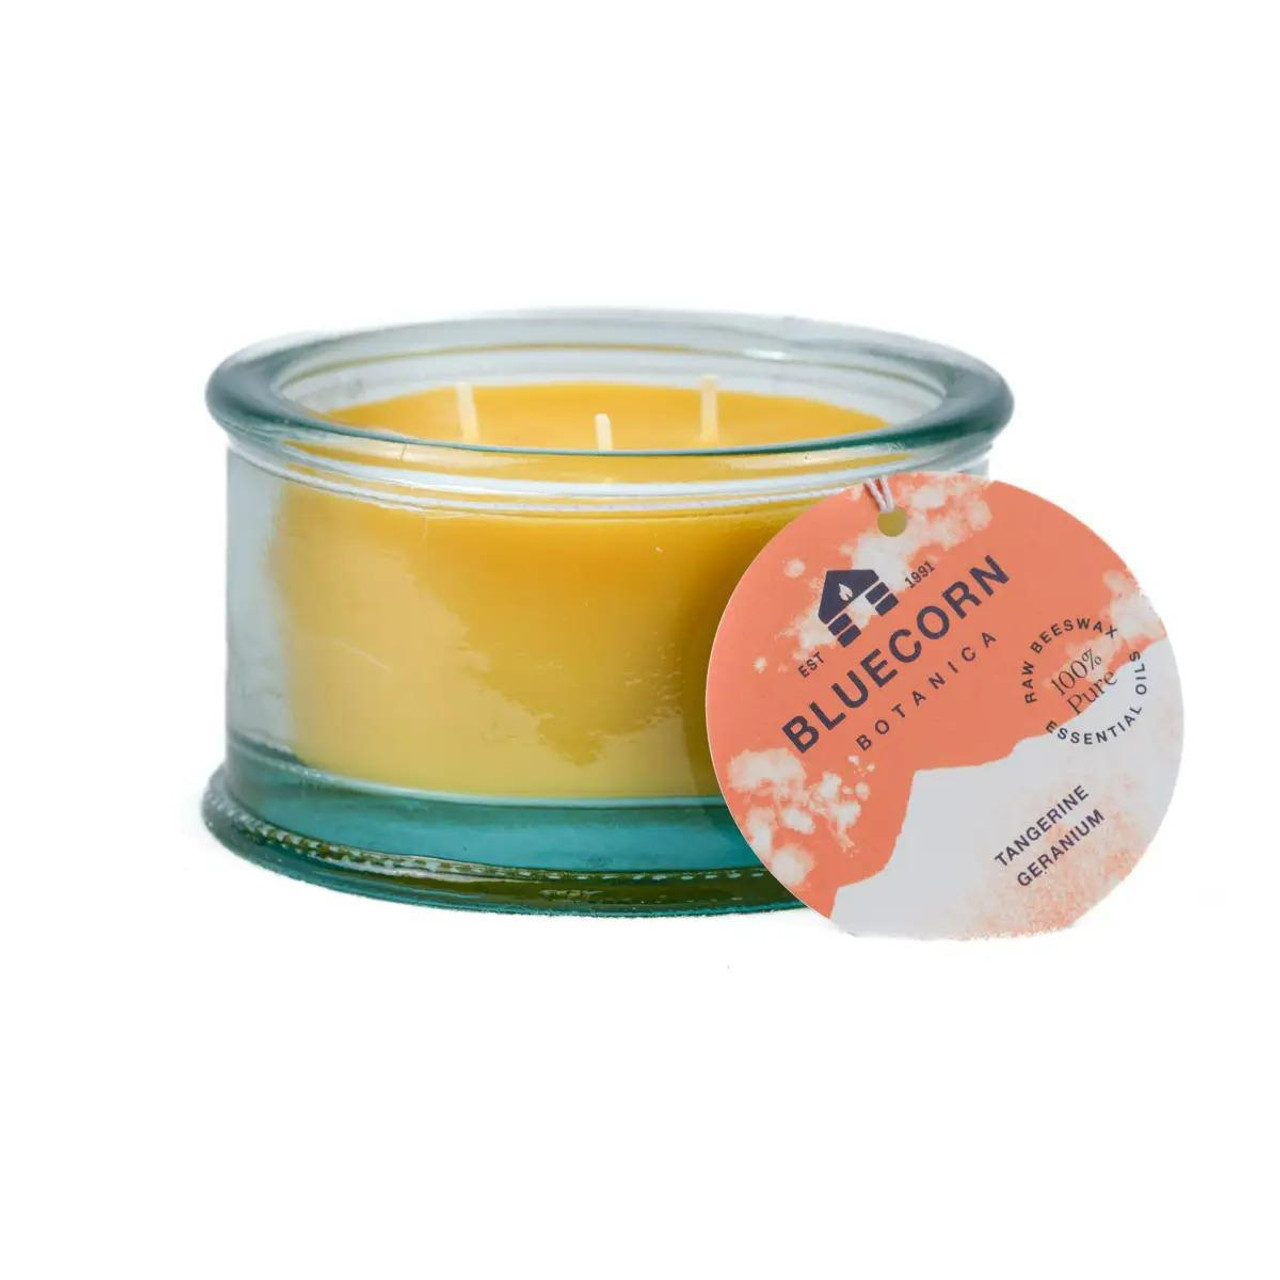 Botanica Beeswax Scented Candle - 3-Wick Spruce